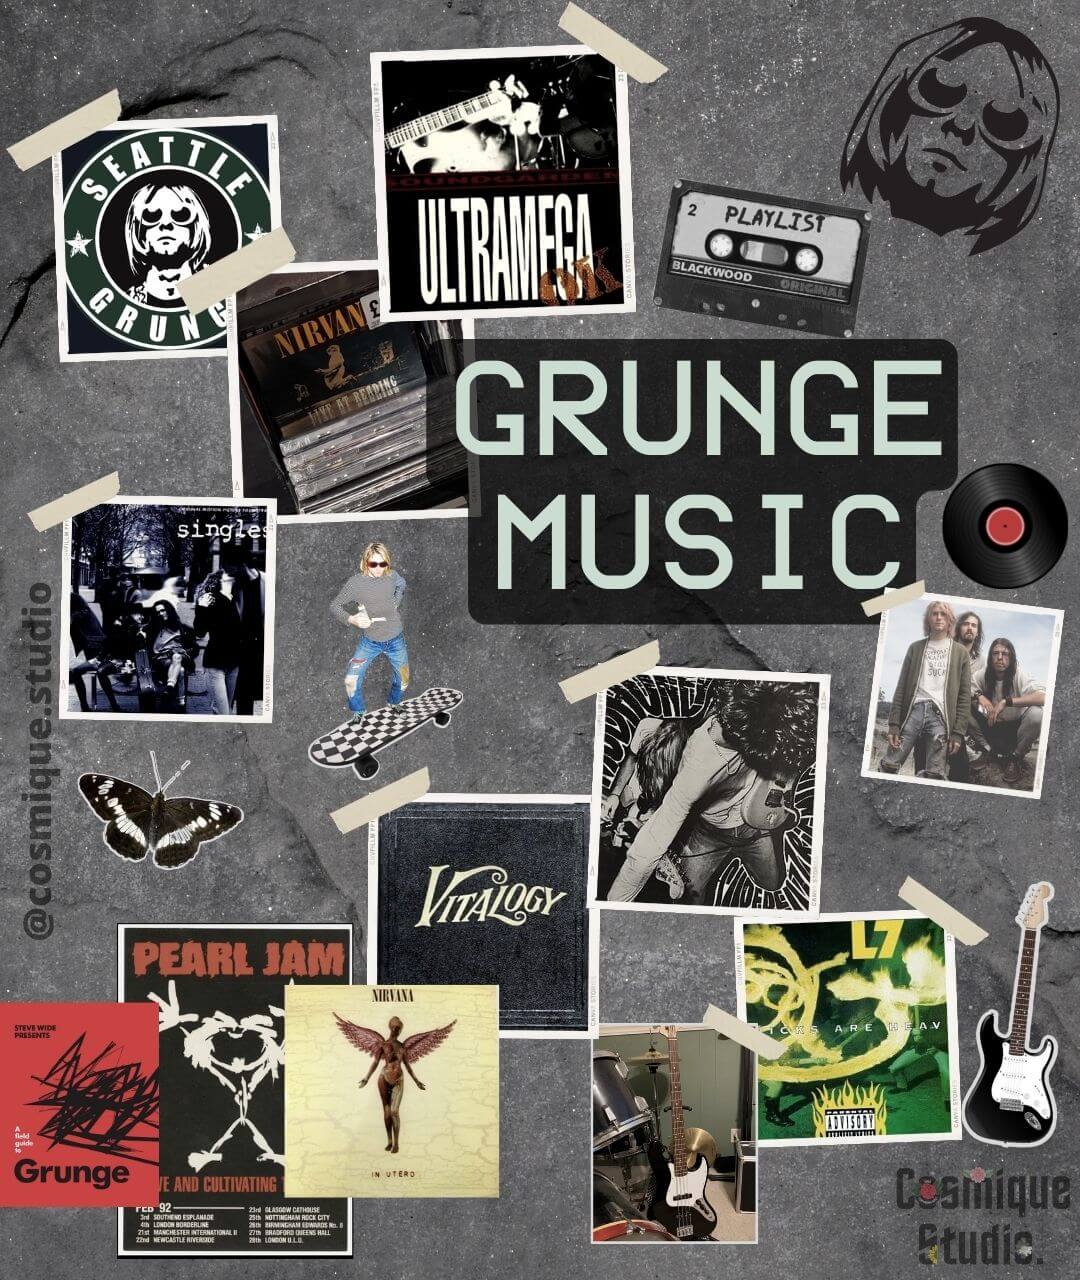 grunge as a music genre including seattle grunge, kurt cobain, and pearl jam supported with musical elements 